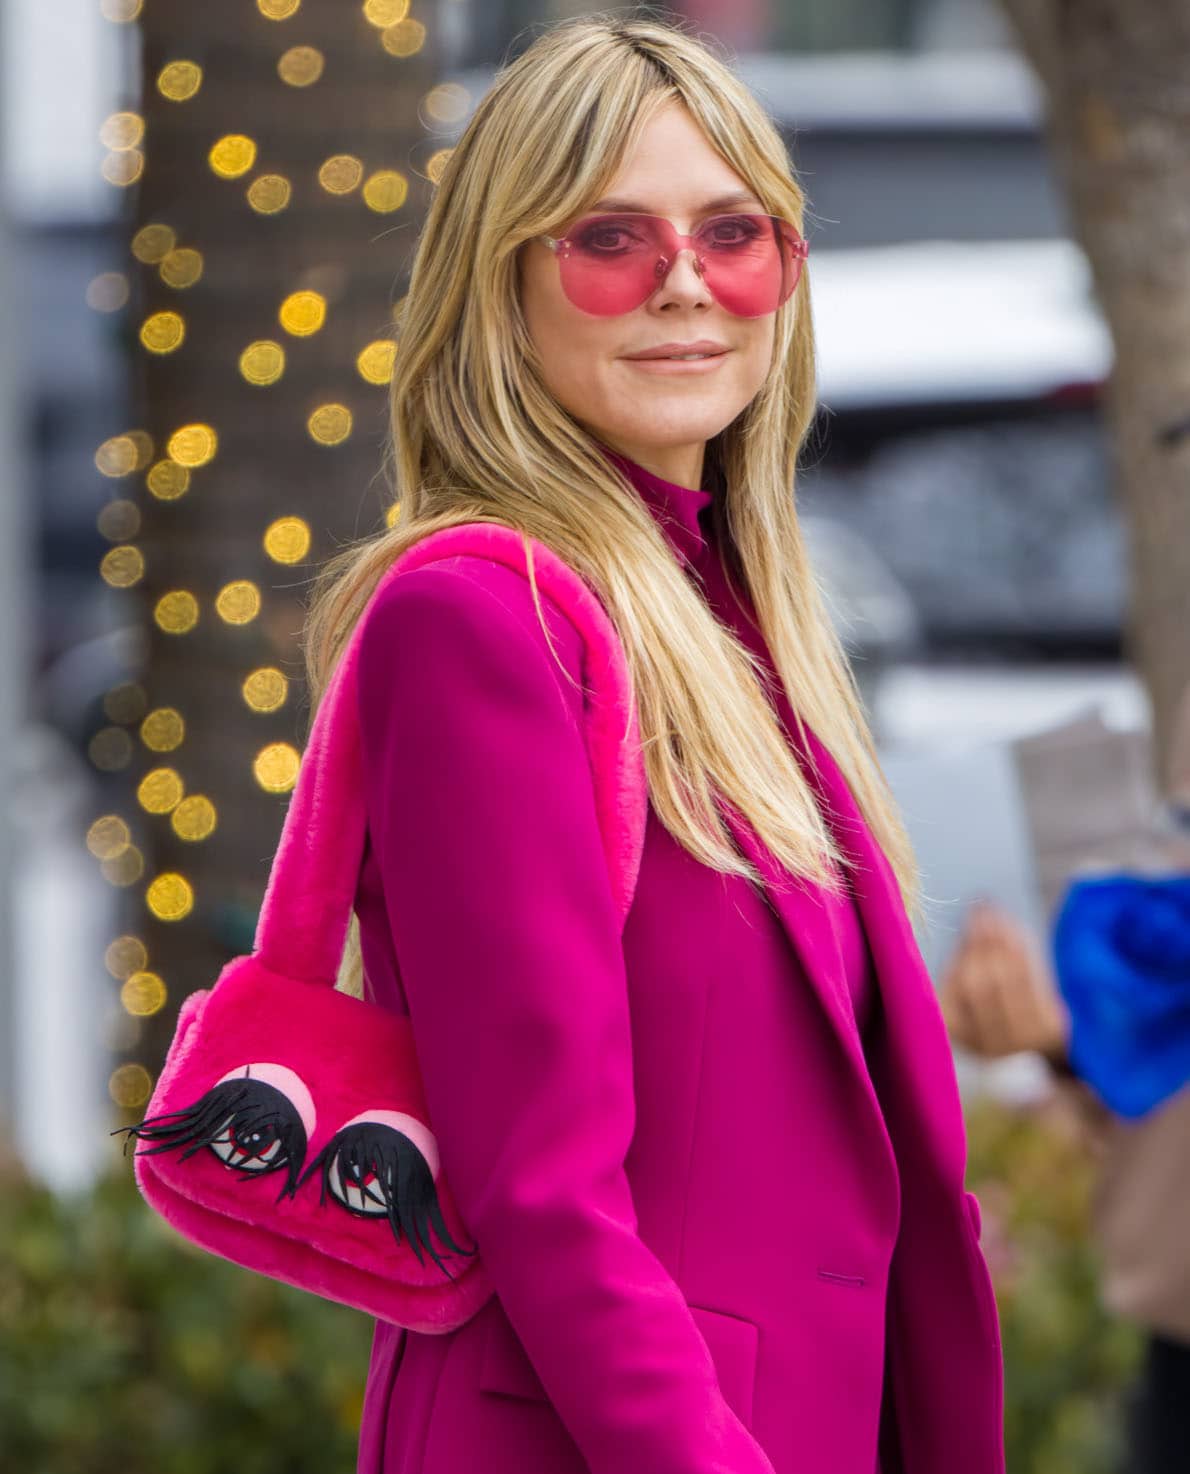 Heidi Klum continues with the hot pink theme of her look by carrying a fuzzy pink Moschino bag with eye decoration